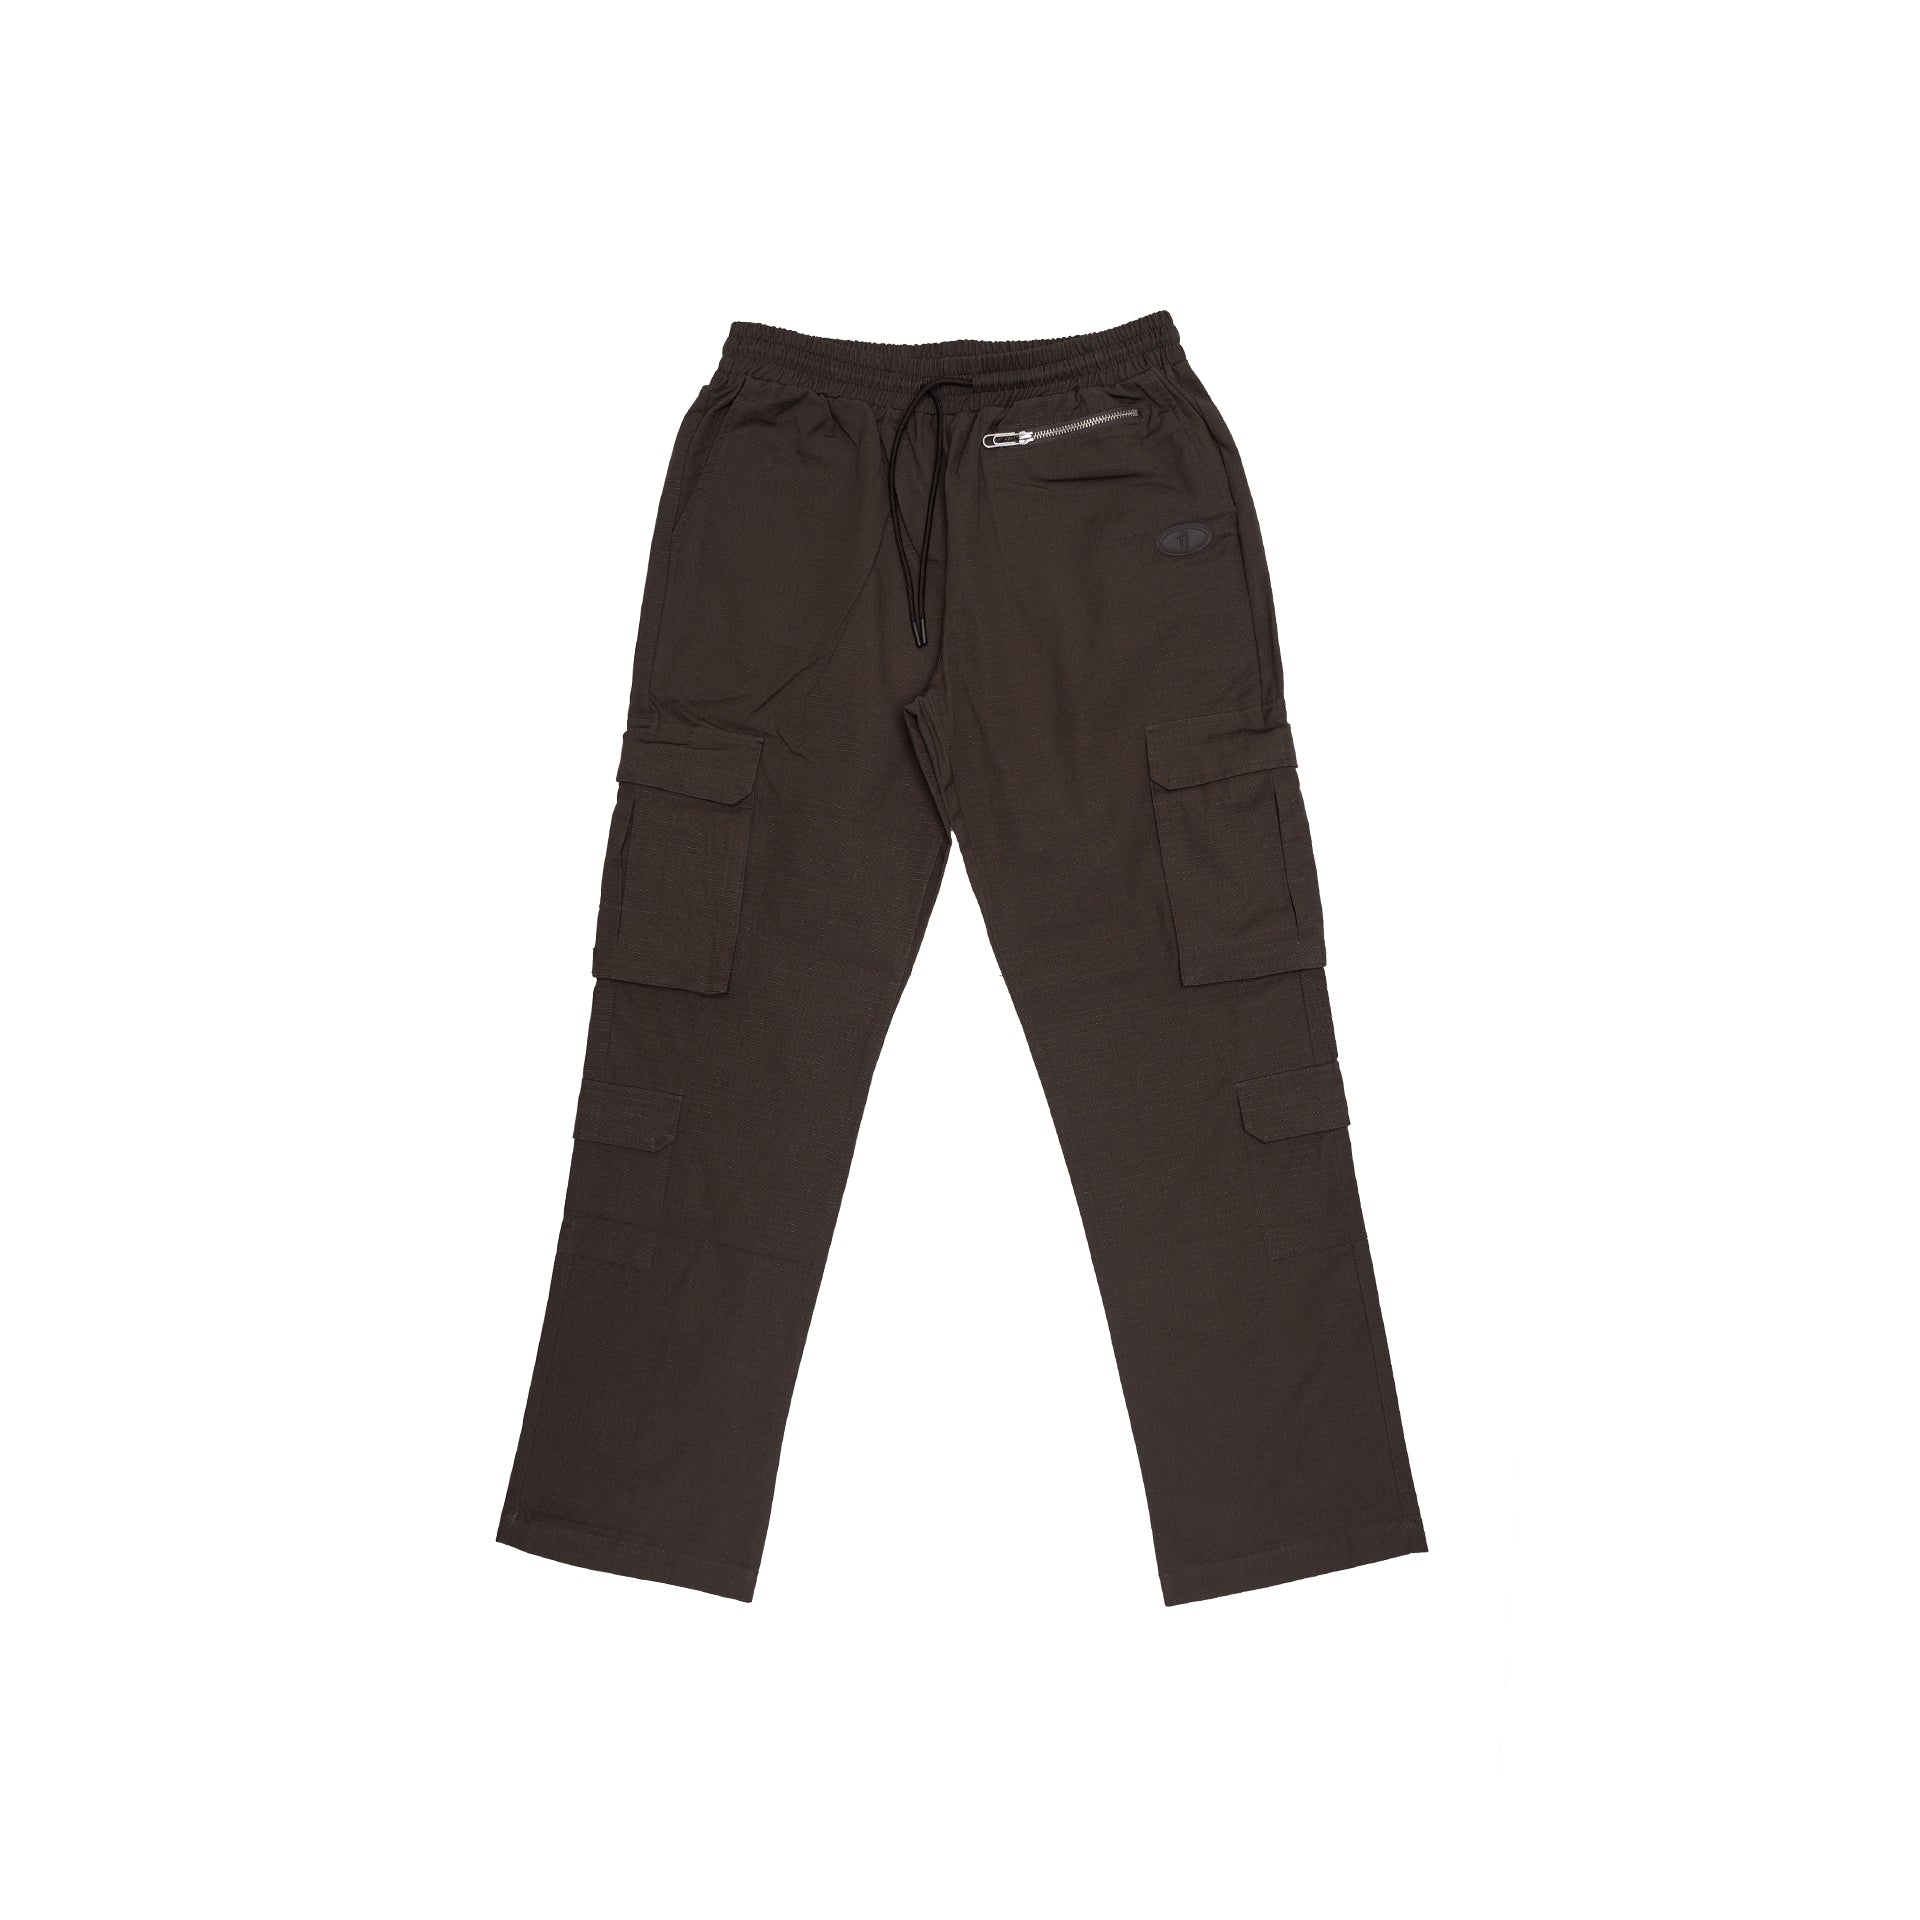 Gray Cargo Pants by Brandtionary